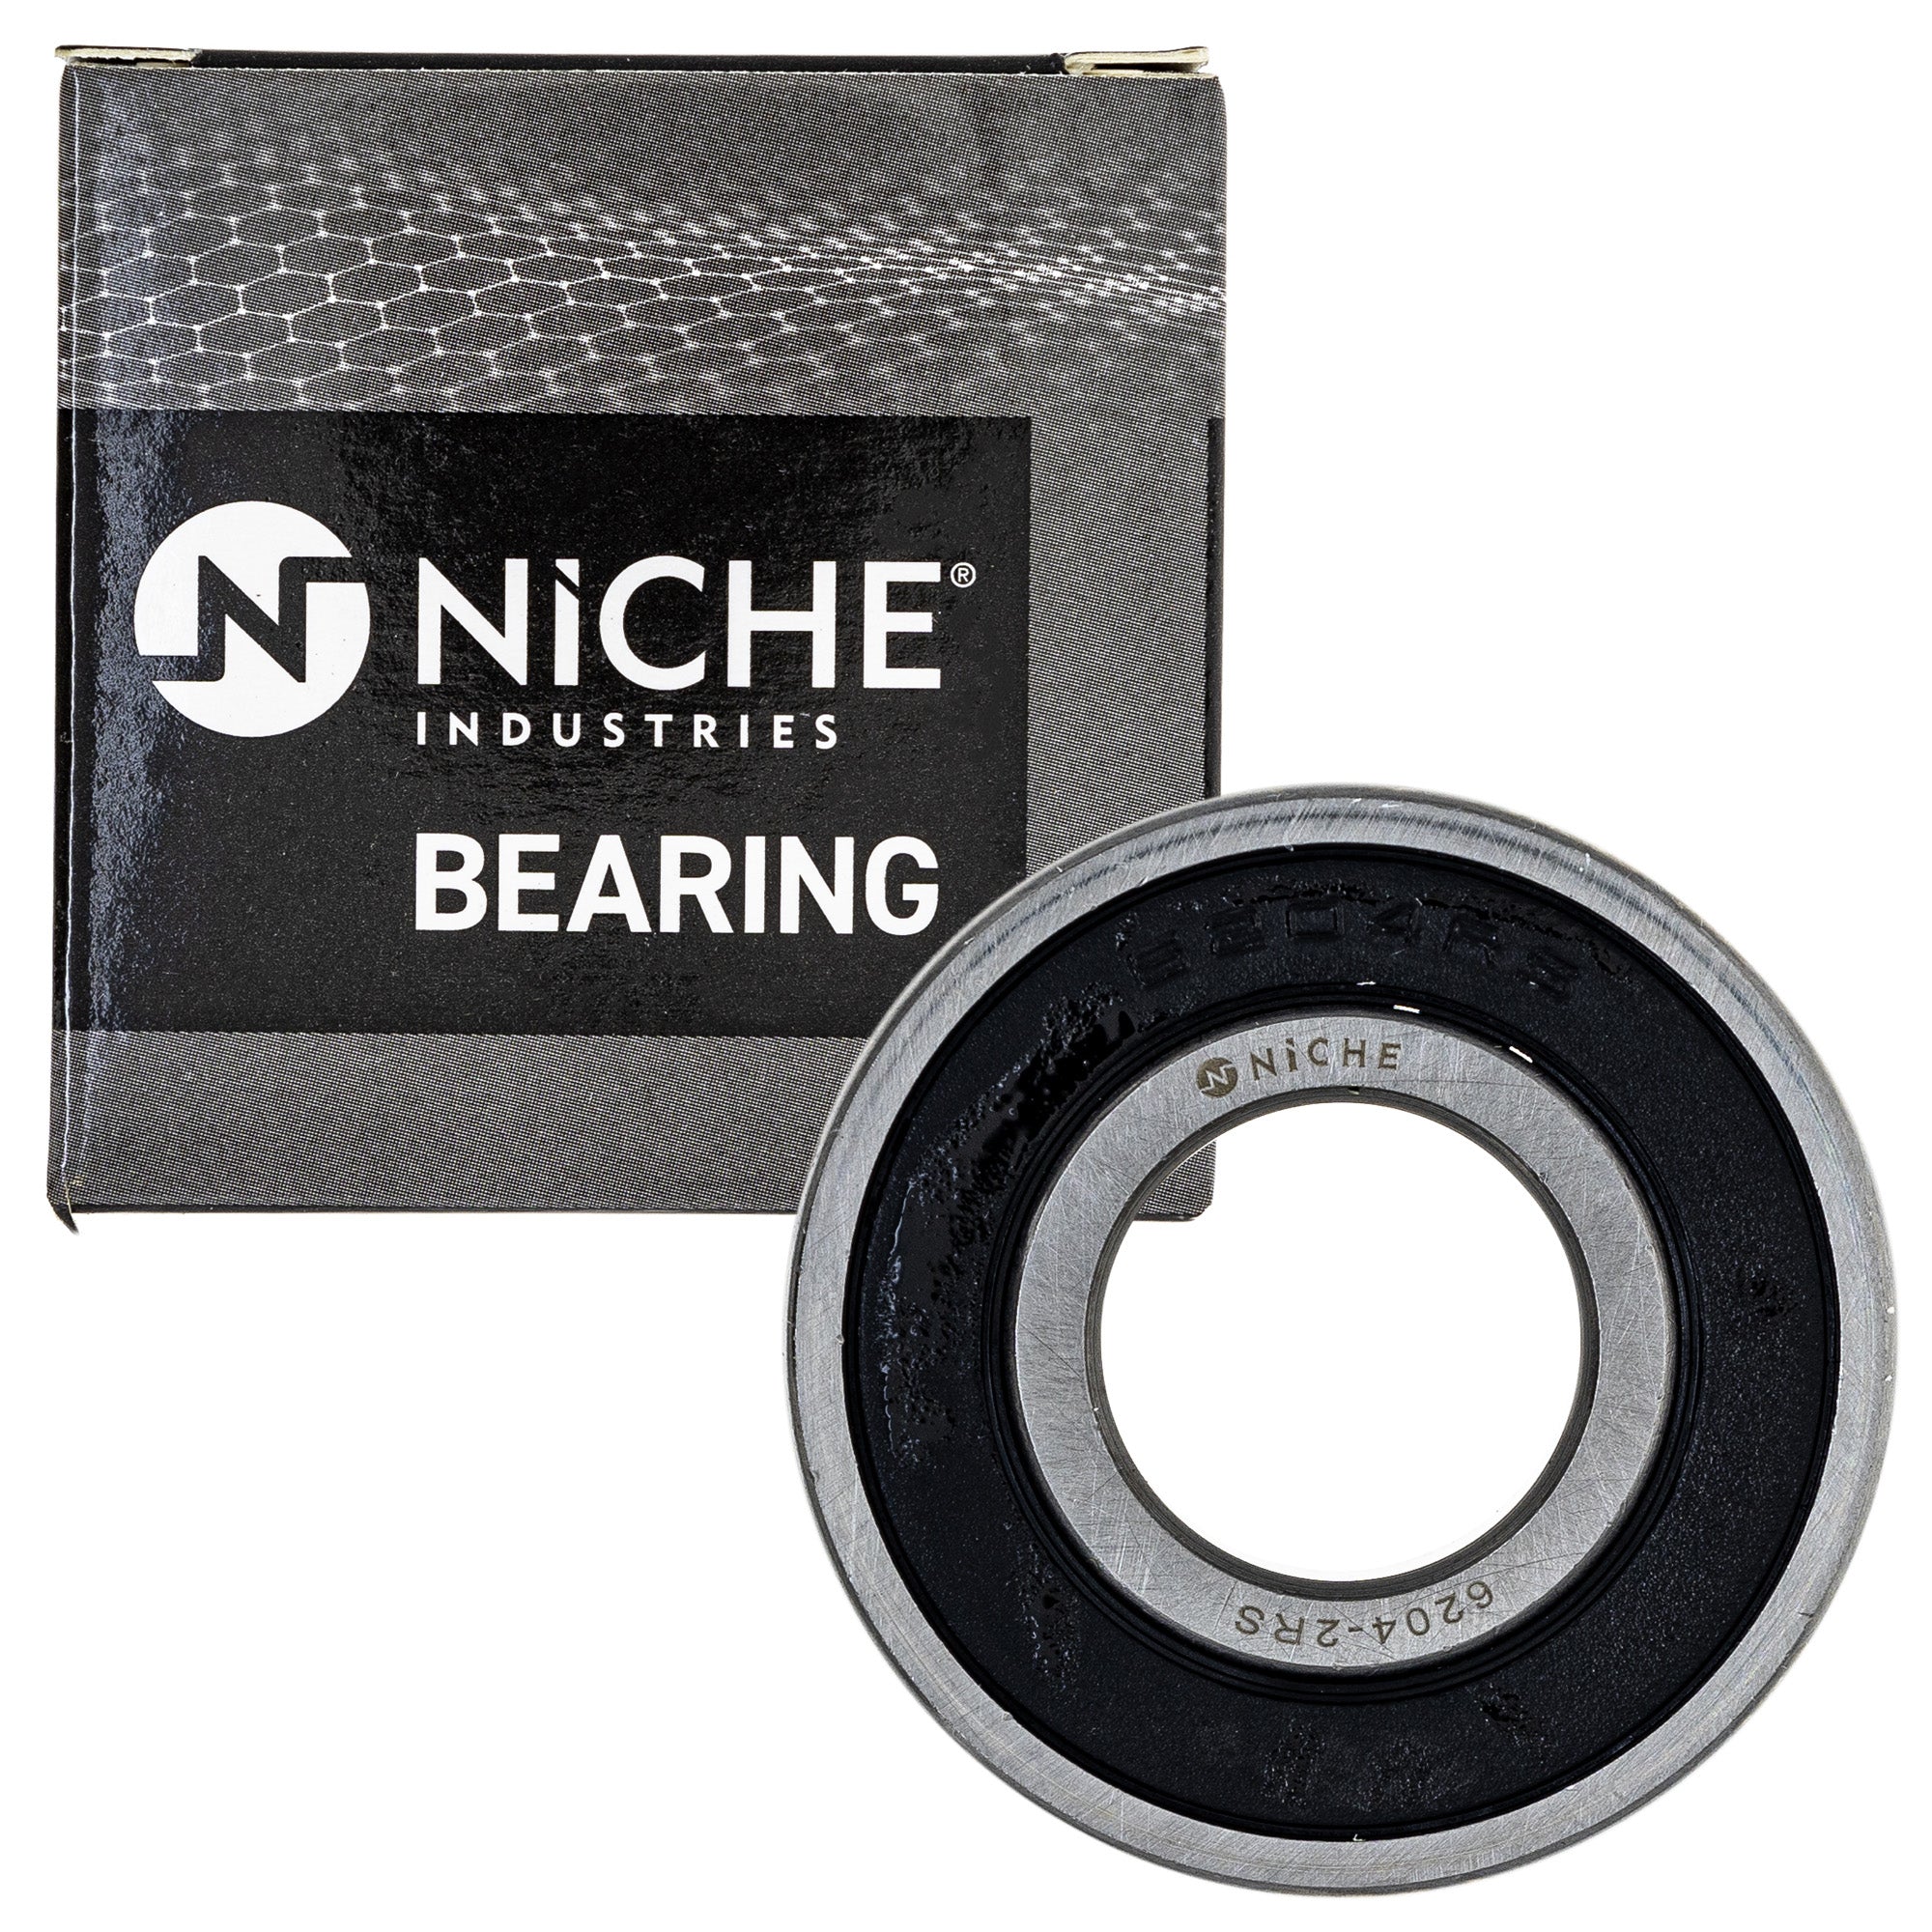 NICHE MK1009133 Wheel Bearing Seal Kit for zOTHER Ref No RM250